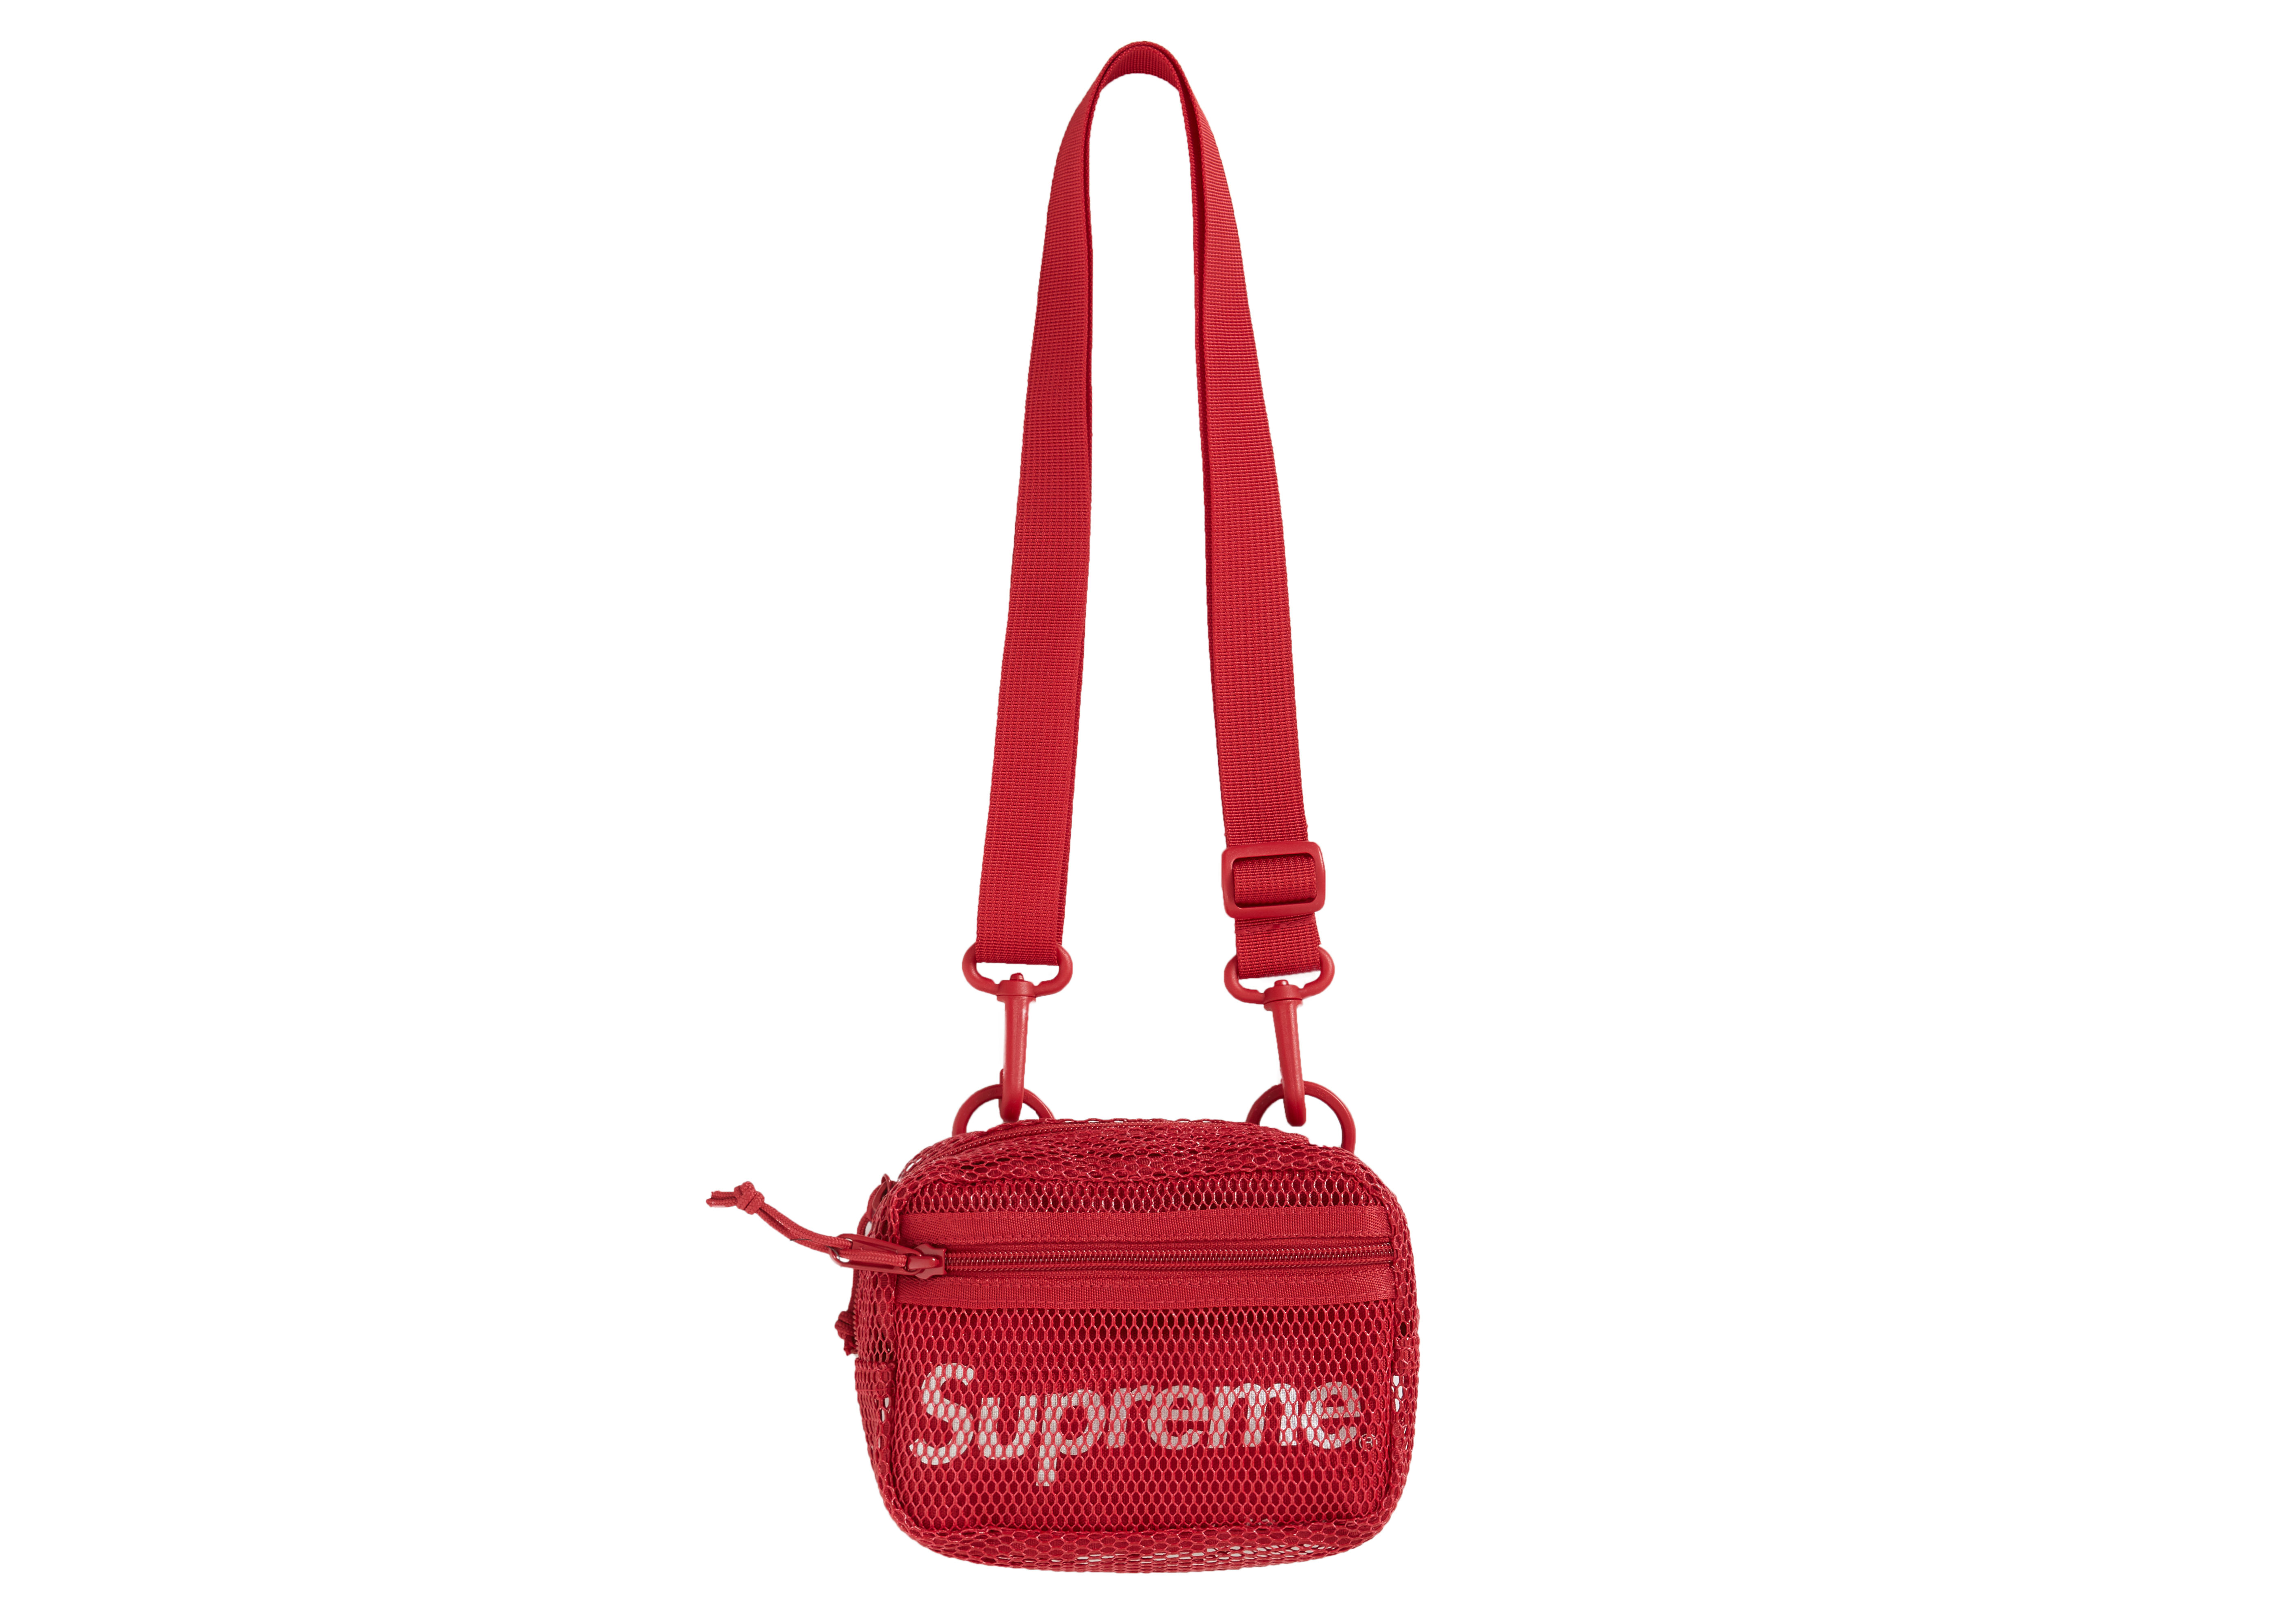 Buy & Sell Supreme Fanny Packs Accessories